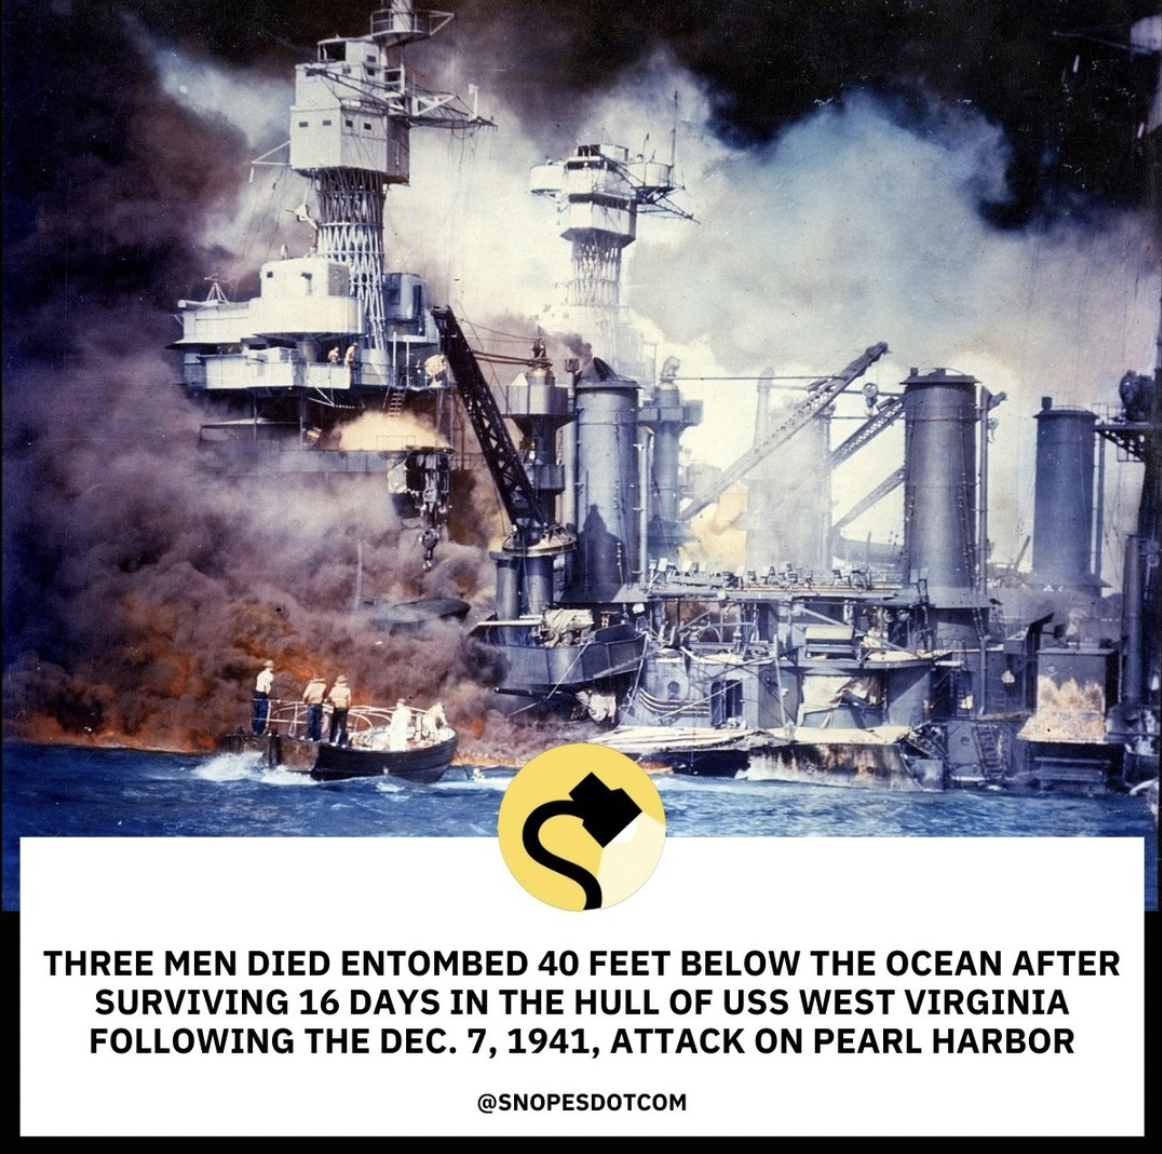 Snopes Facts - uss west virginia pearl harbor - Three Men Died Entombed 40 Feet Below The Ocean After Surviving 16 Days In The Hull Of Uss West Virginia ing The Dec. 7, 1941, Attack On Pearl Harbor